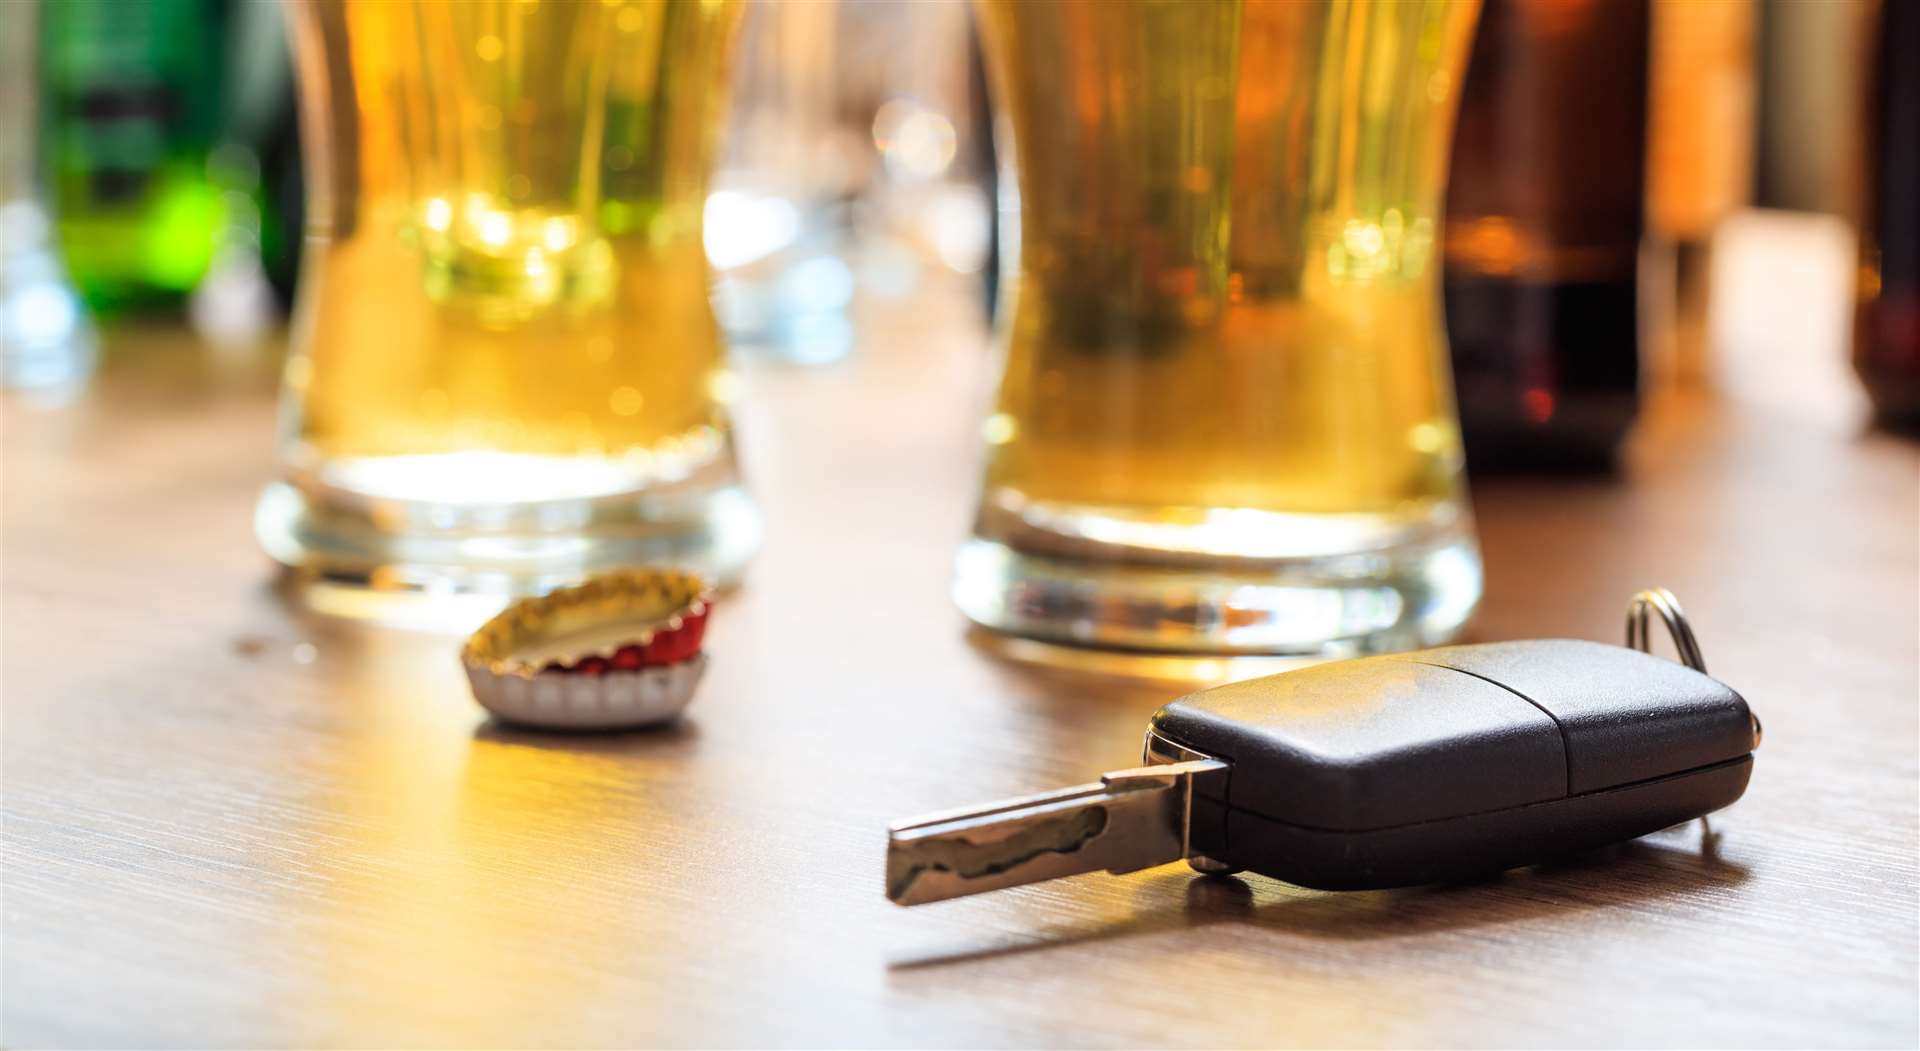 Drink-driving convictions have decreased by half since 2007.